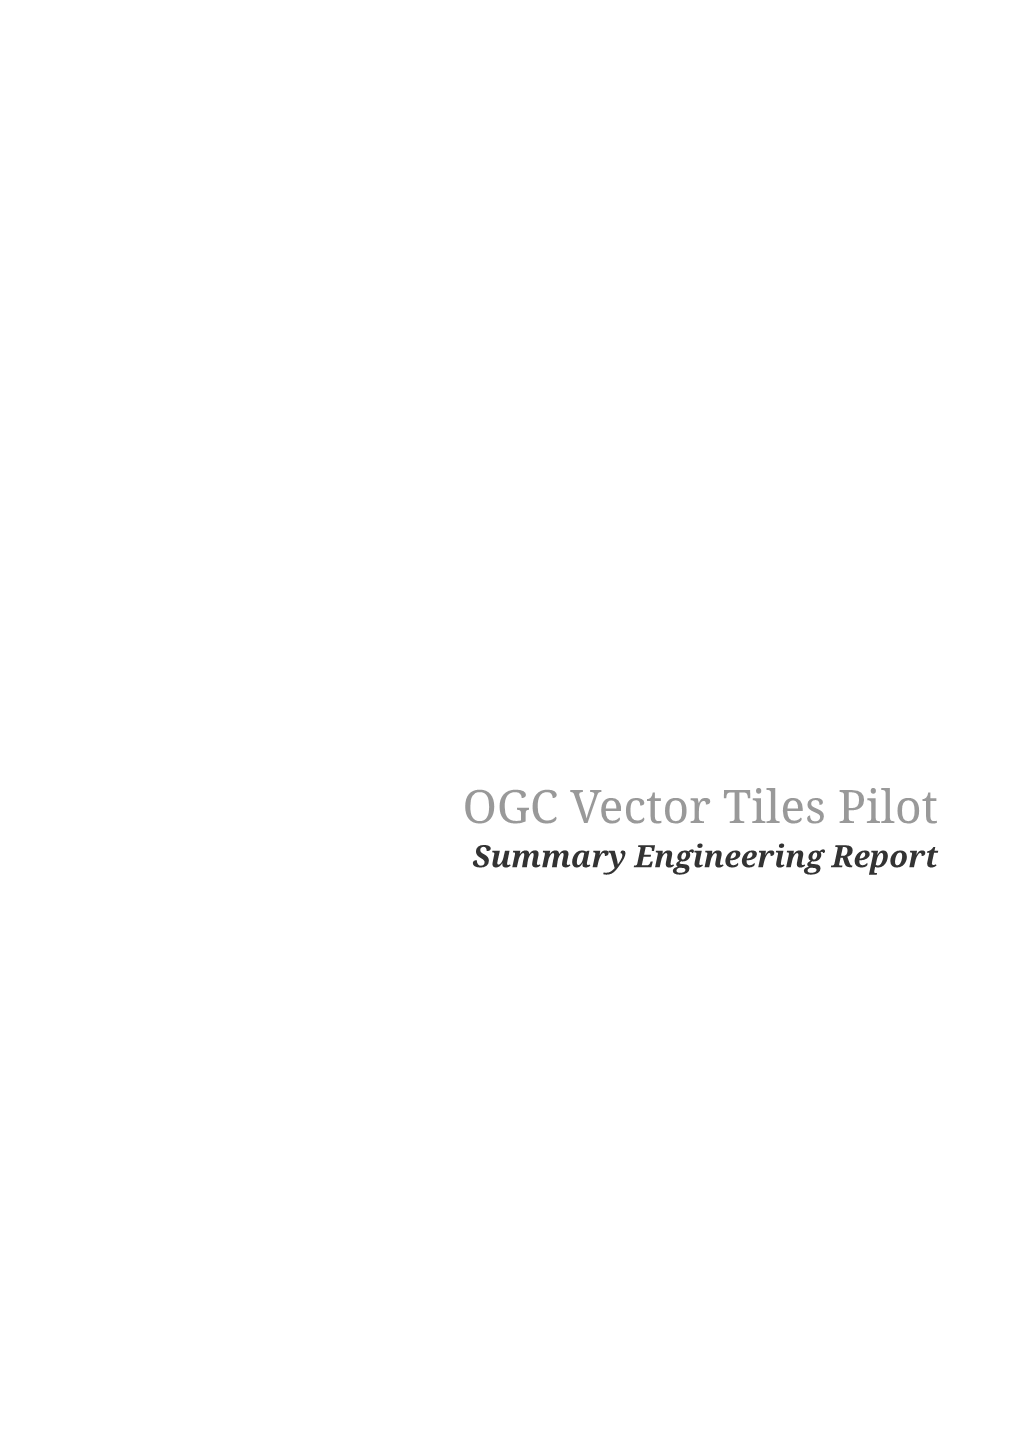 OGC Vector Tiles Pilot Summary Engineering Report Table of Contents